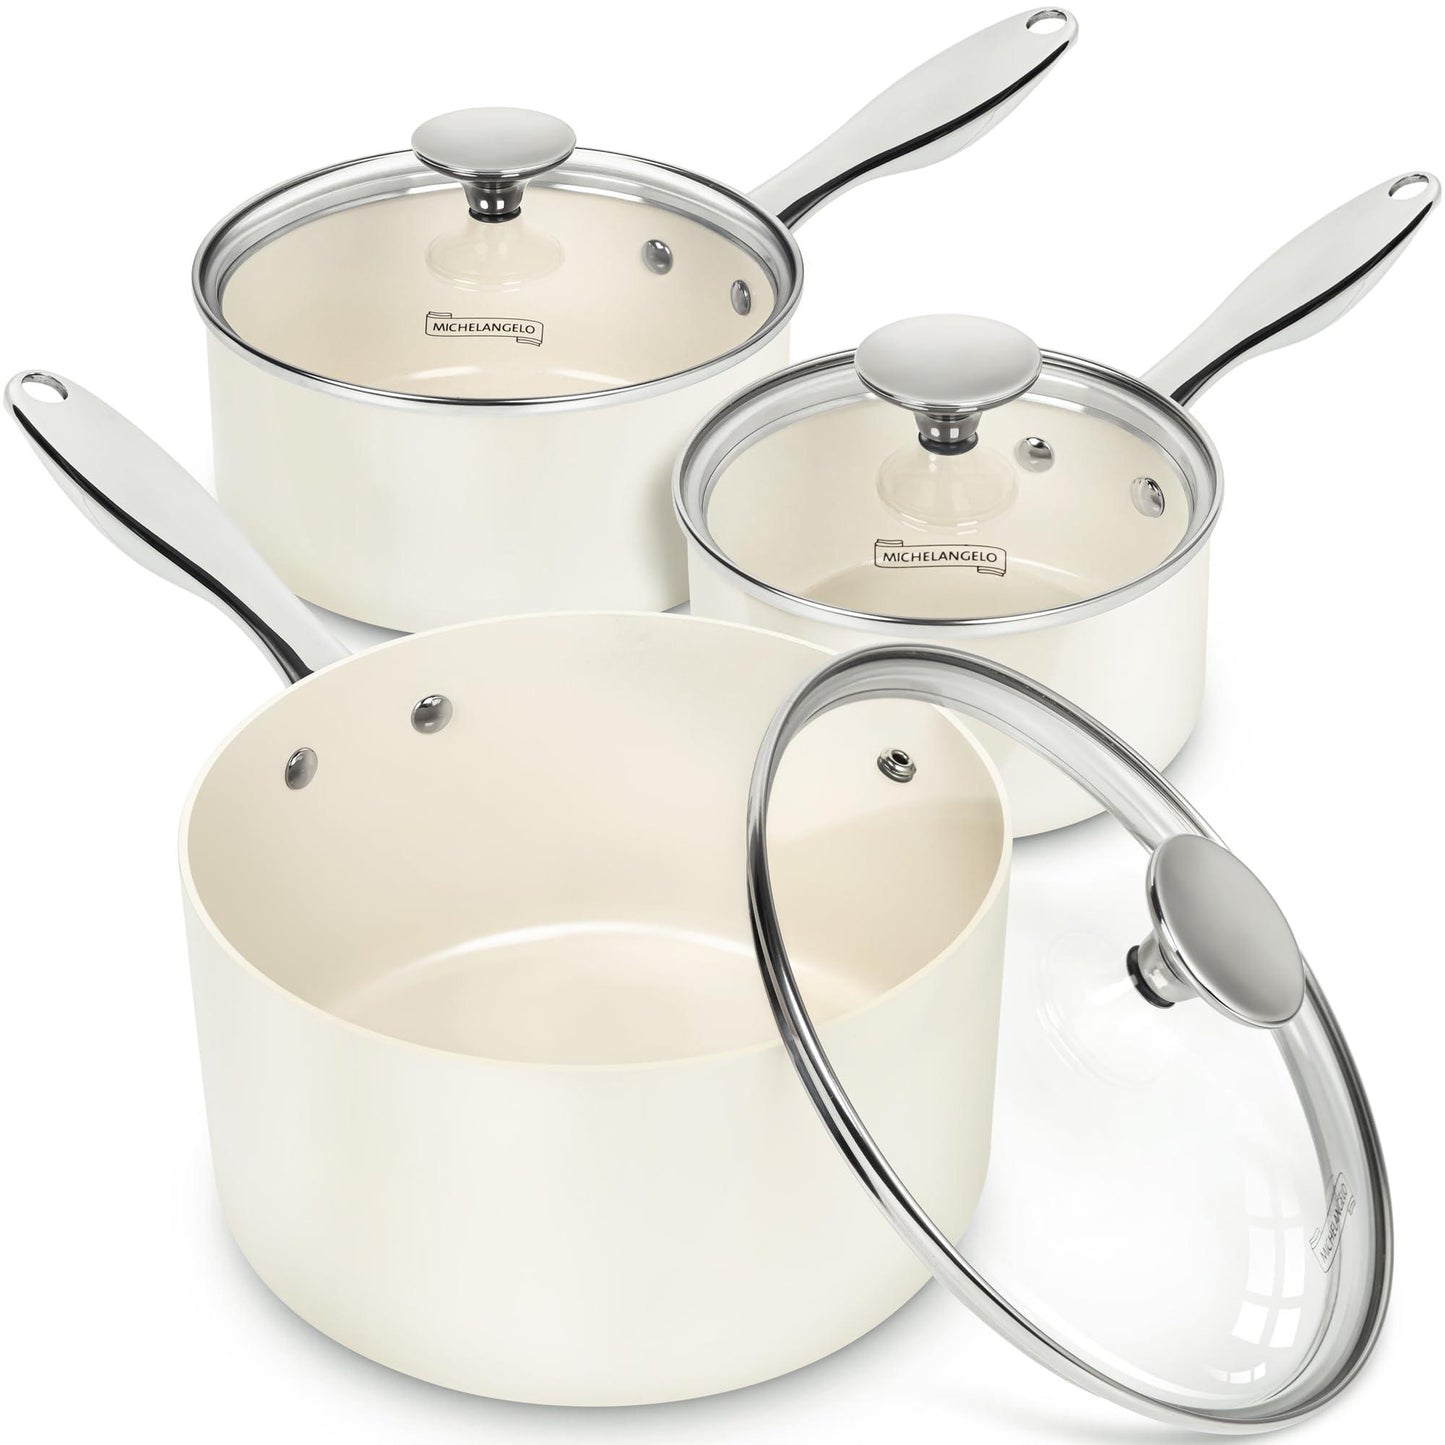 MICHELANGELO Sauce Pan Sets, Ceramic Saucepans with Lid, 1Qt & 2Qt & 3Qt Small Pots for Cooking, Nonstick Saucepan Set with Stainless Steel Handle, Oven Safe, White - CookCave